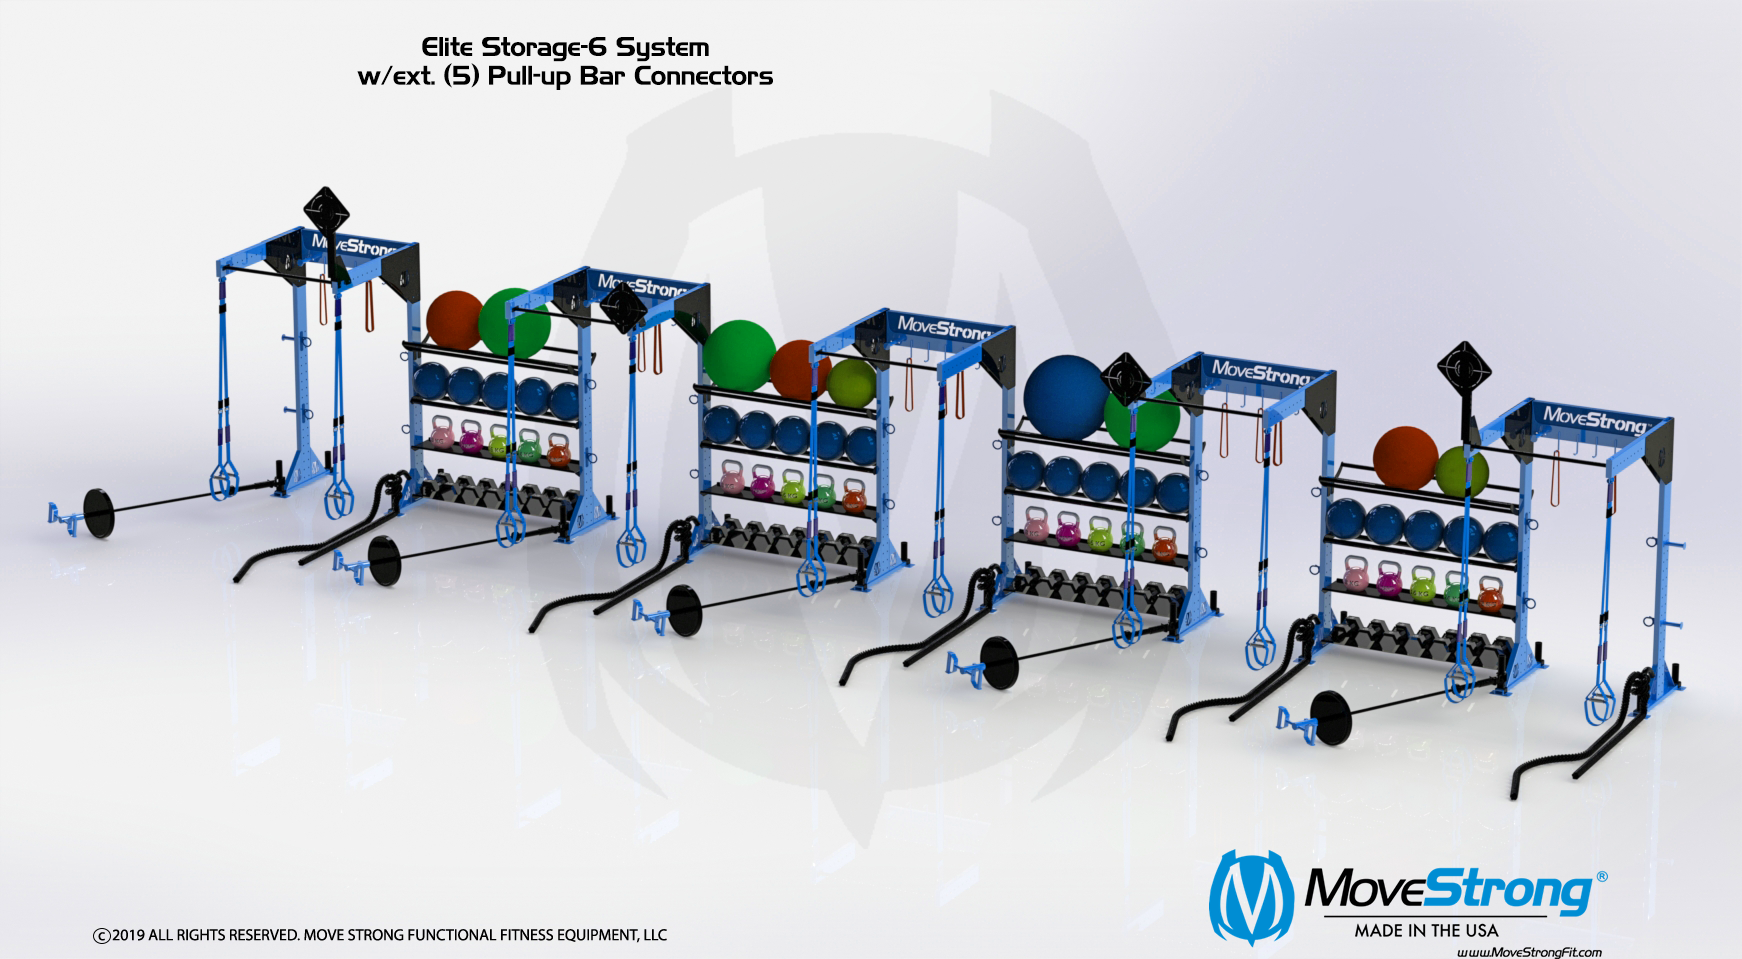 ELite_Storage-6_modular-pull-up ext-connectors - 5.png